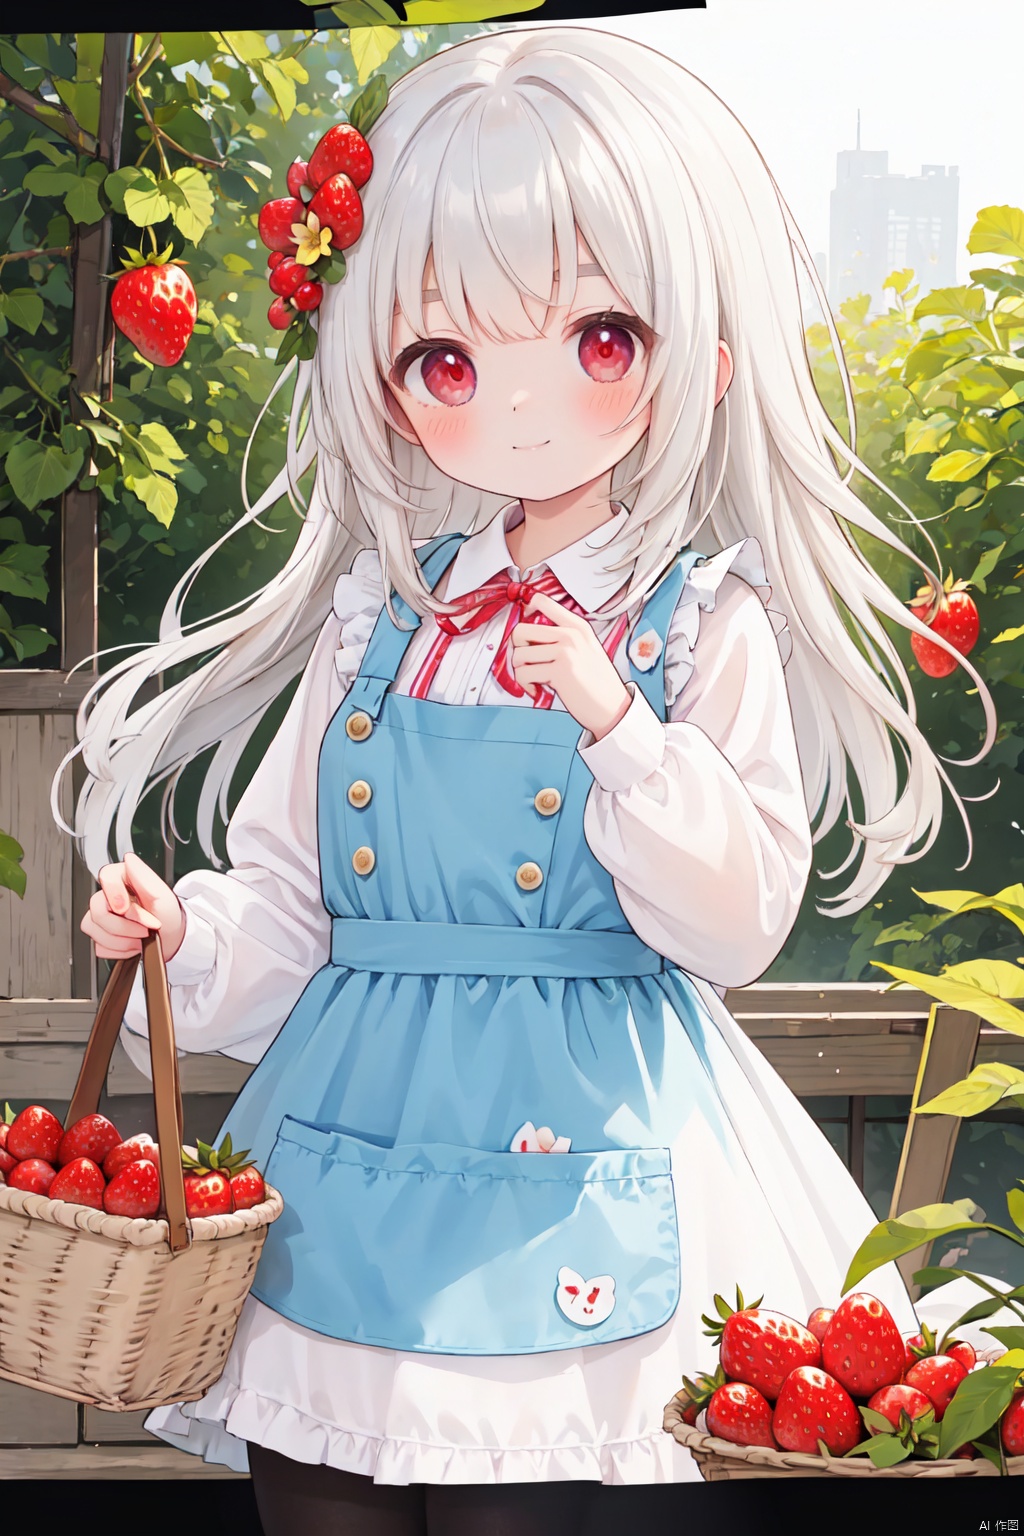  food,fruit,1girl,hair_ornament,apple,solo,long_hair,tomato,letterboxed,grapes,basket,apron,shirt,carrot,flower,holding,blush,white_shirt,looking_at_viewer,long_sleeves,hair_flower,silver_hair,red_eyes,eyebrows_visible_through_hairtitle=eyebrows_visible_through_hair),bow,strawberry,bangs,cutting_board,closed_mouth,smile,day,holding_basket,tree,breasts